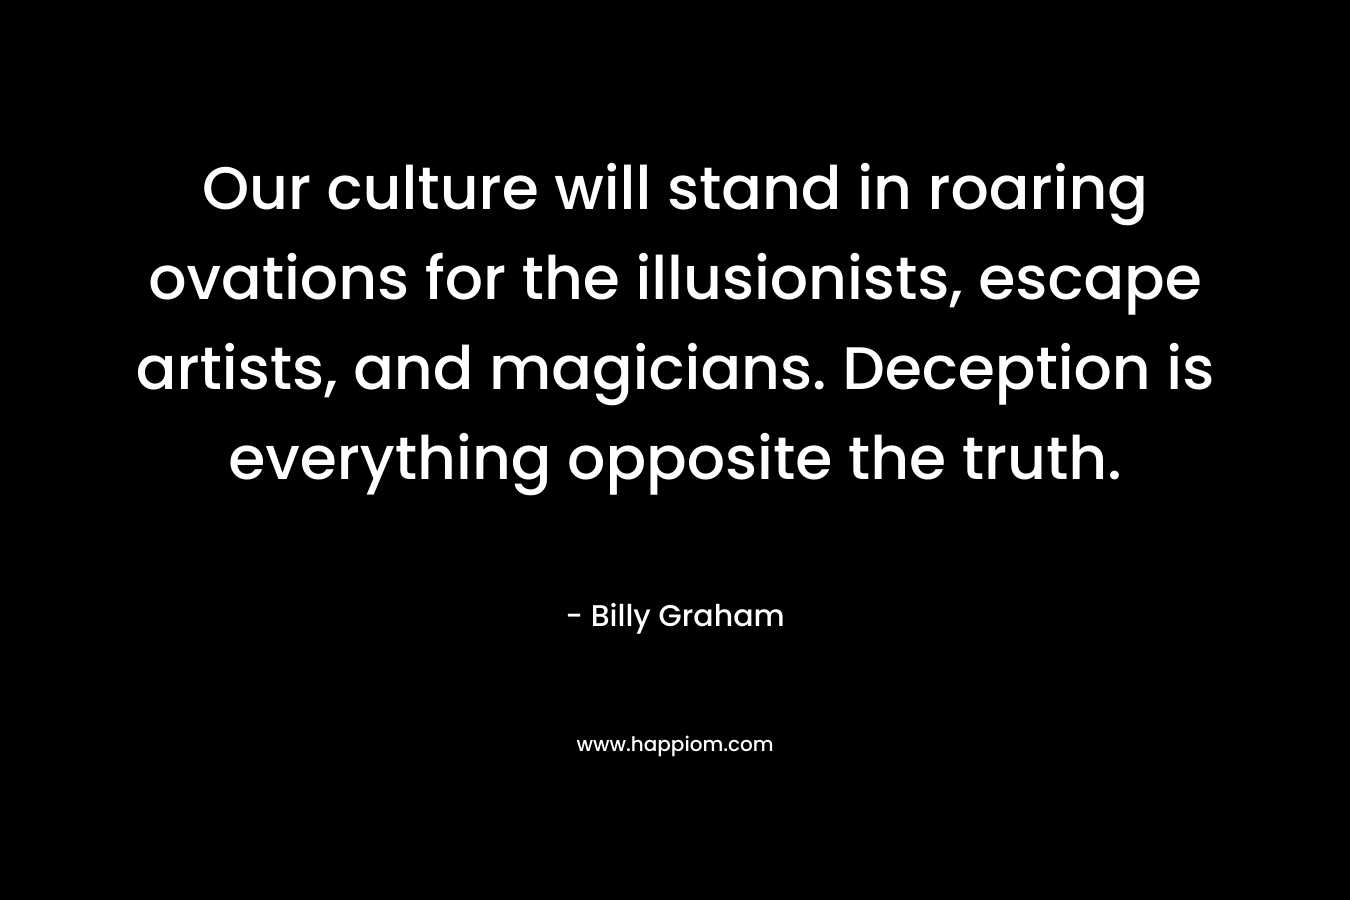 Our culture will stand in roaring ovations for the illusionists, escape artists, and magicians. Deception is everything opposite the truth.